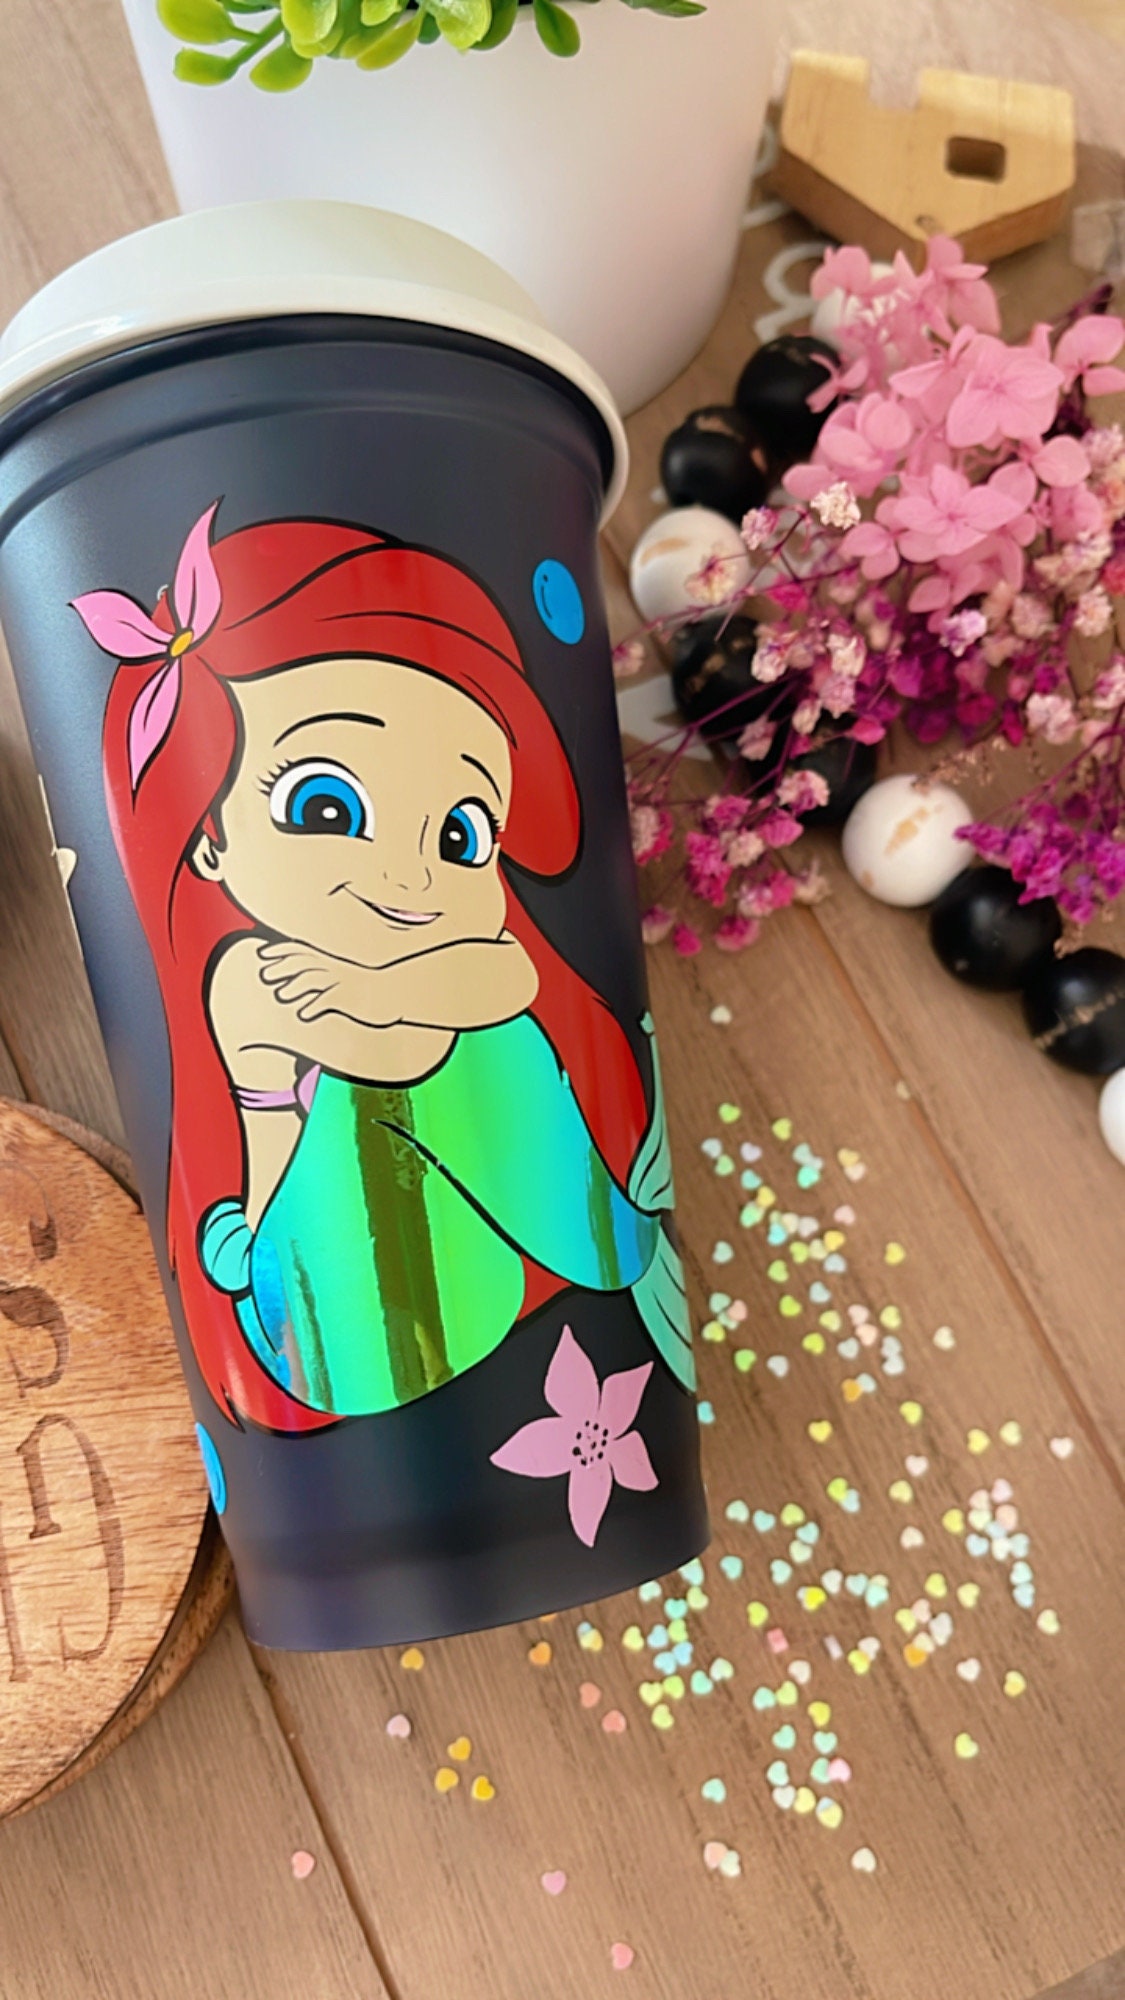  Disney The Little Mermaid Ariel and Friends Color-Changing  Plastic Tumbler